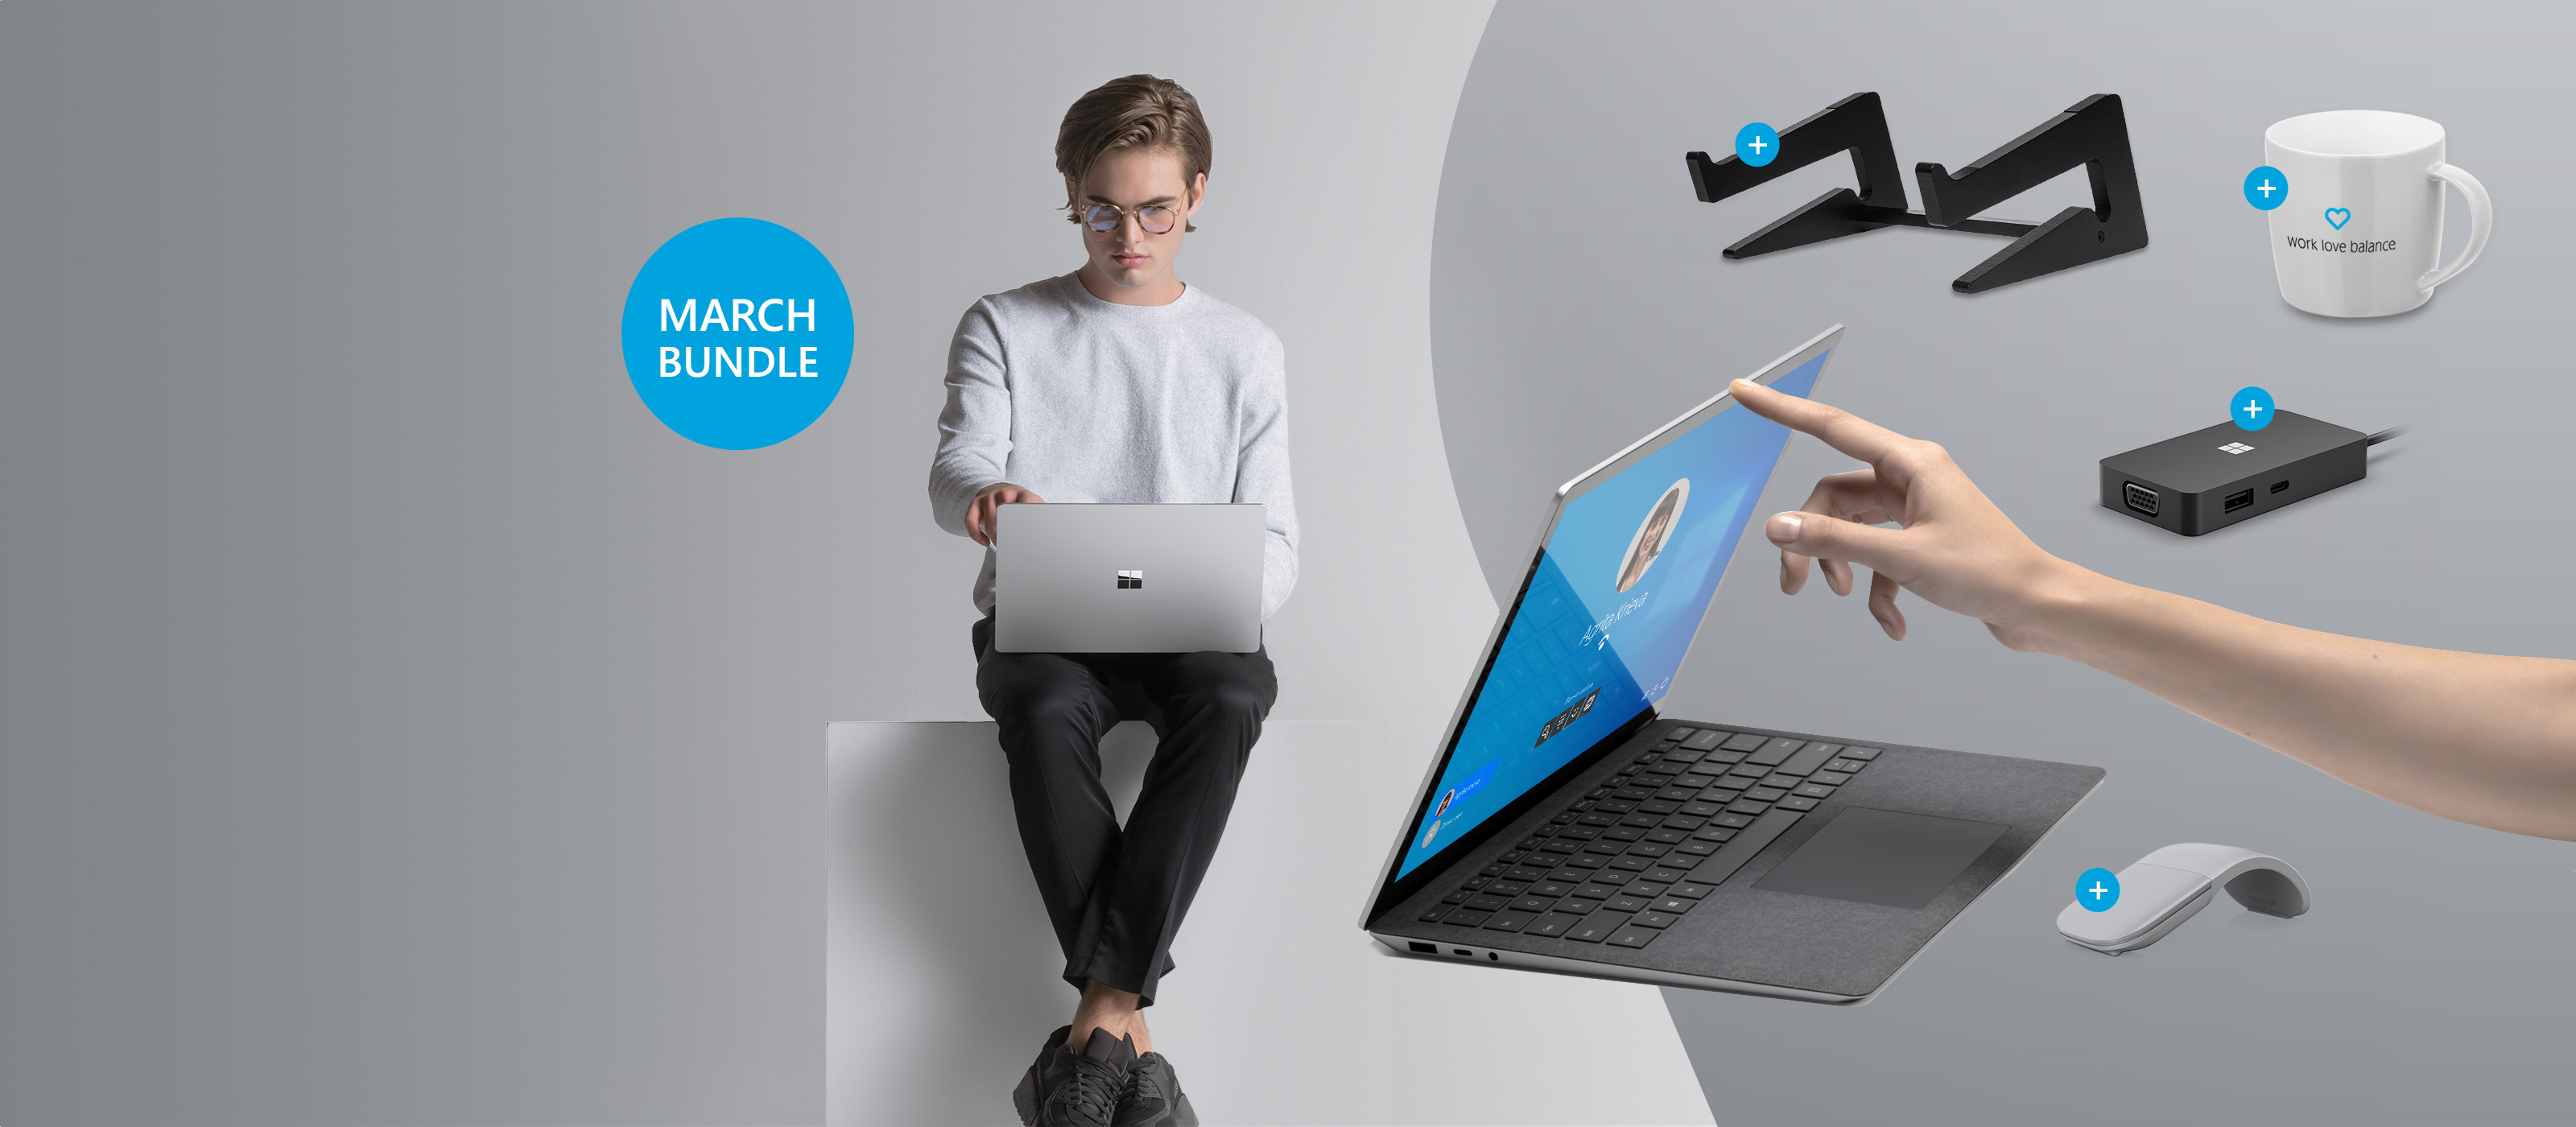 The Surface Laptop 4 is placed in front of a young man who is using the Surface Laptop 4.